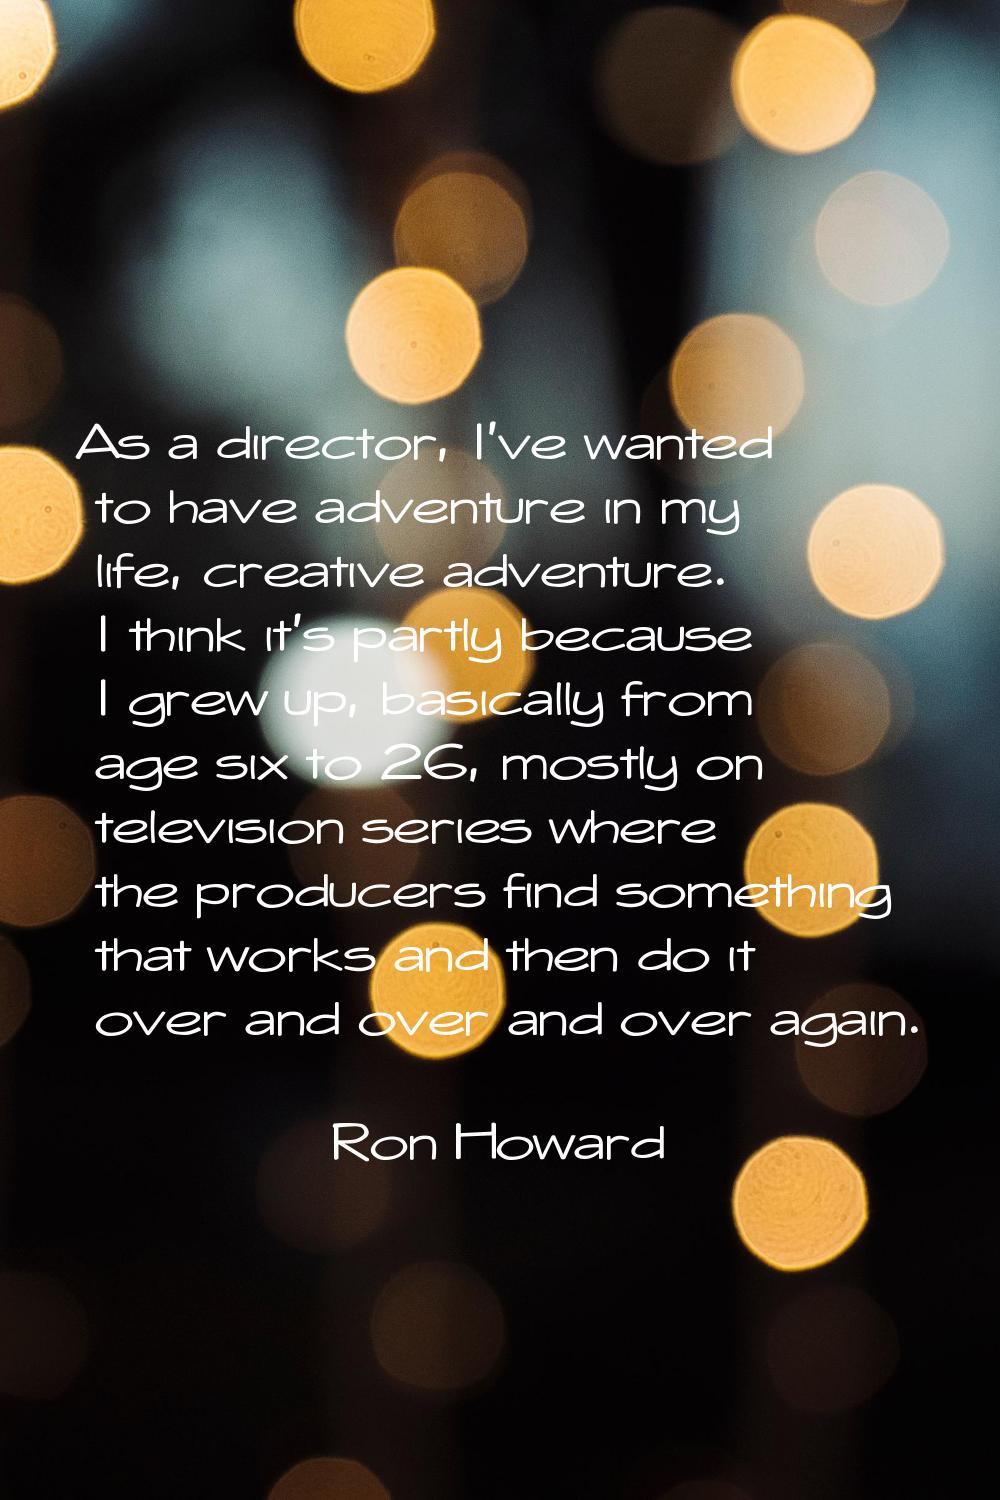 As a director, I've wanted to have adventure in my life, creative adventure. I think it's partly be